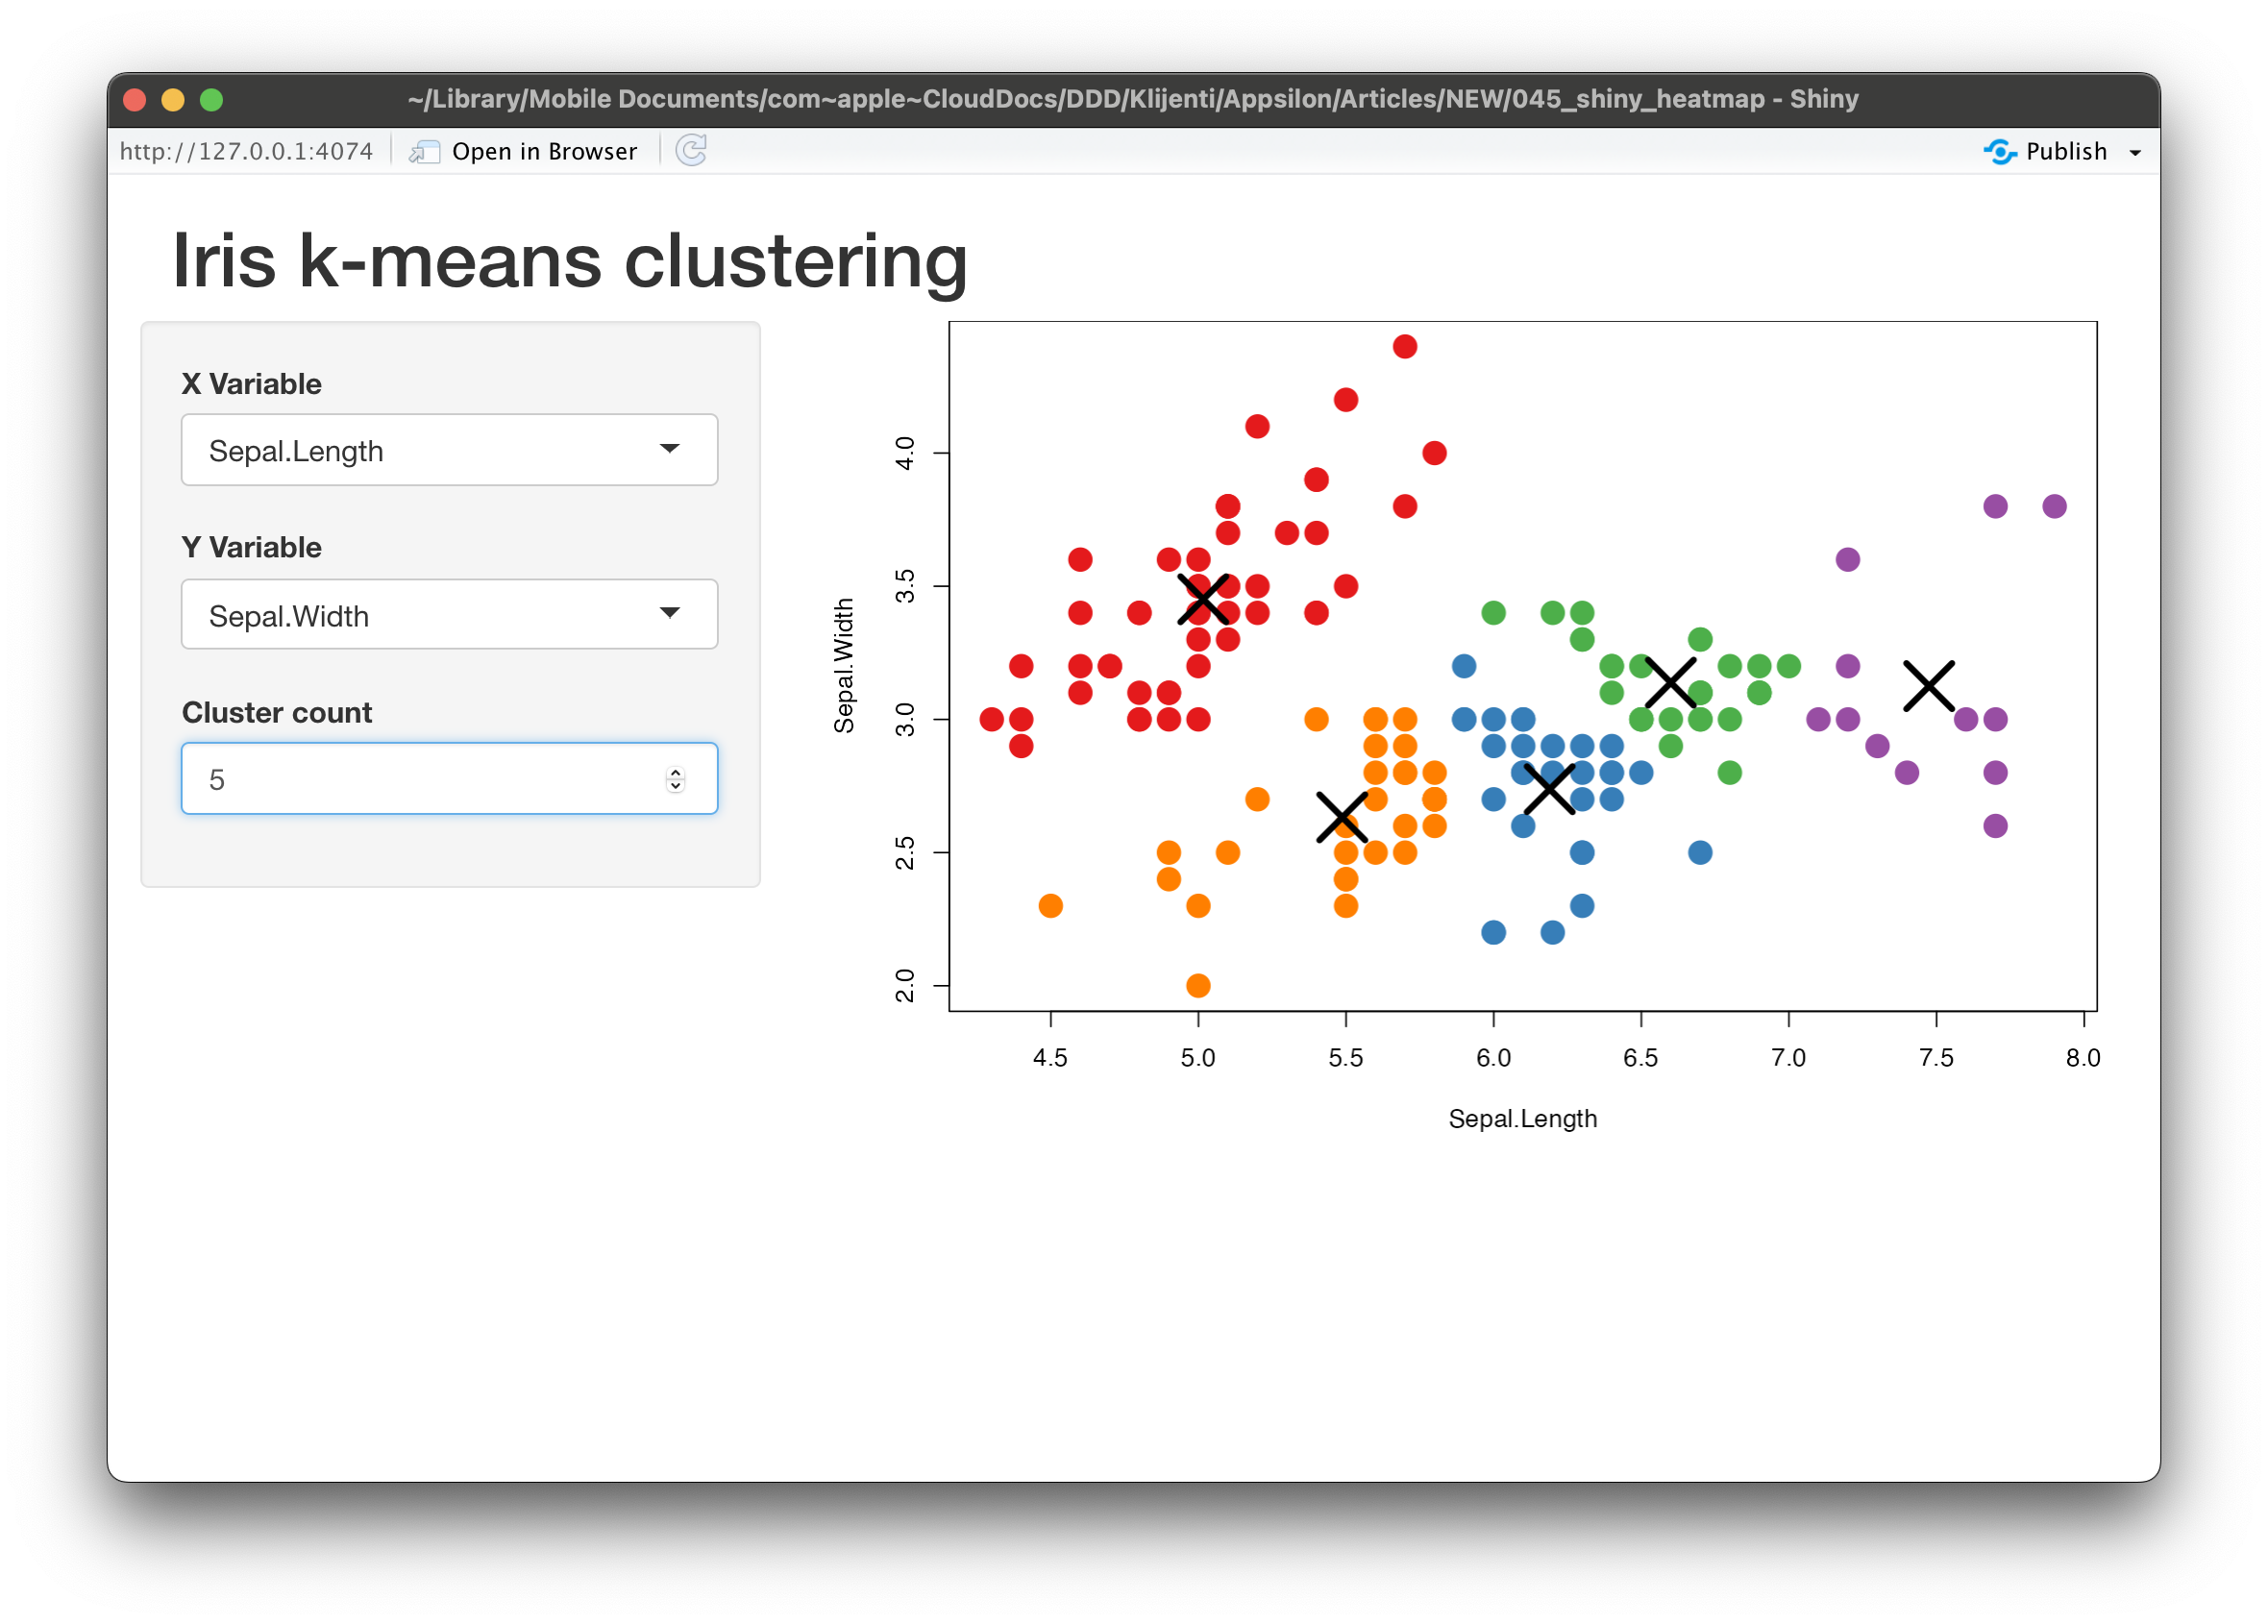 Image 2 - Clustering dashboard after adding shinyHeatmap calls